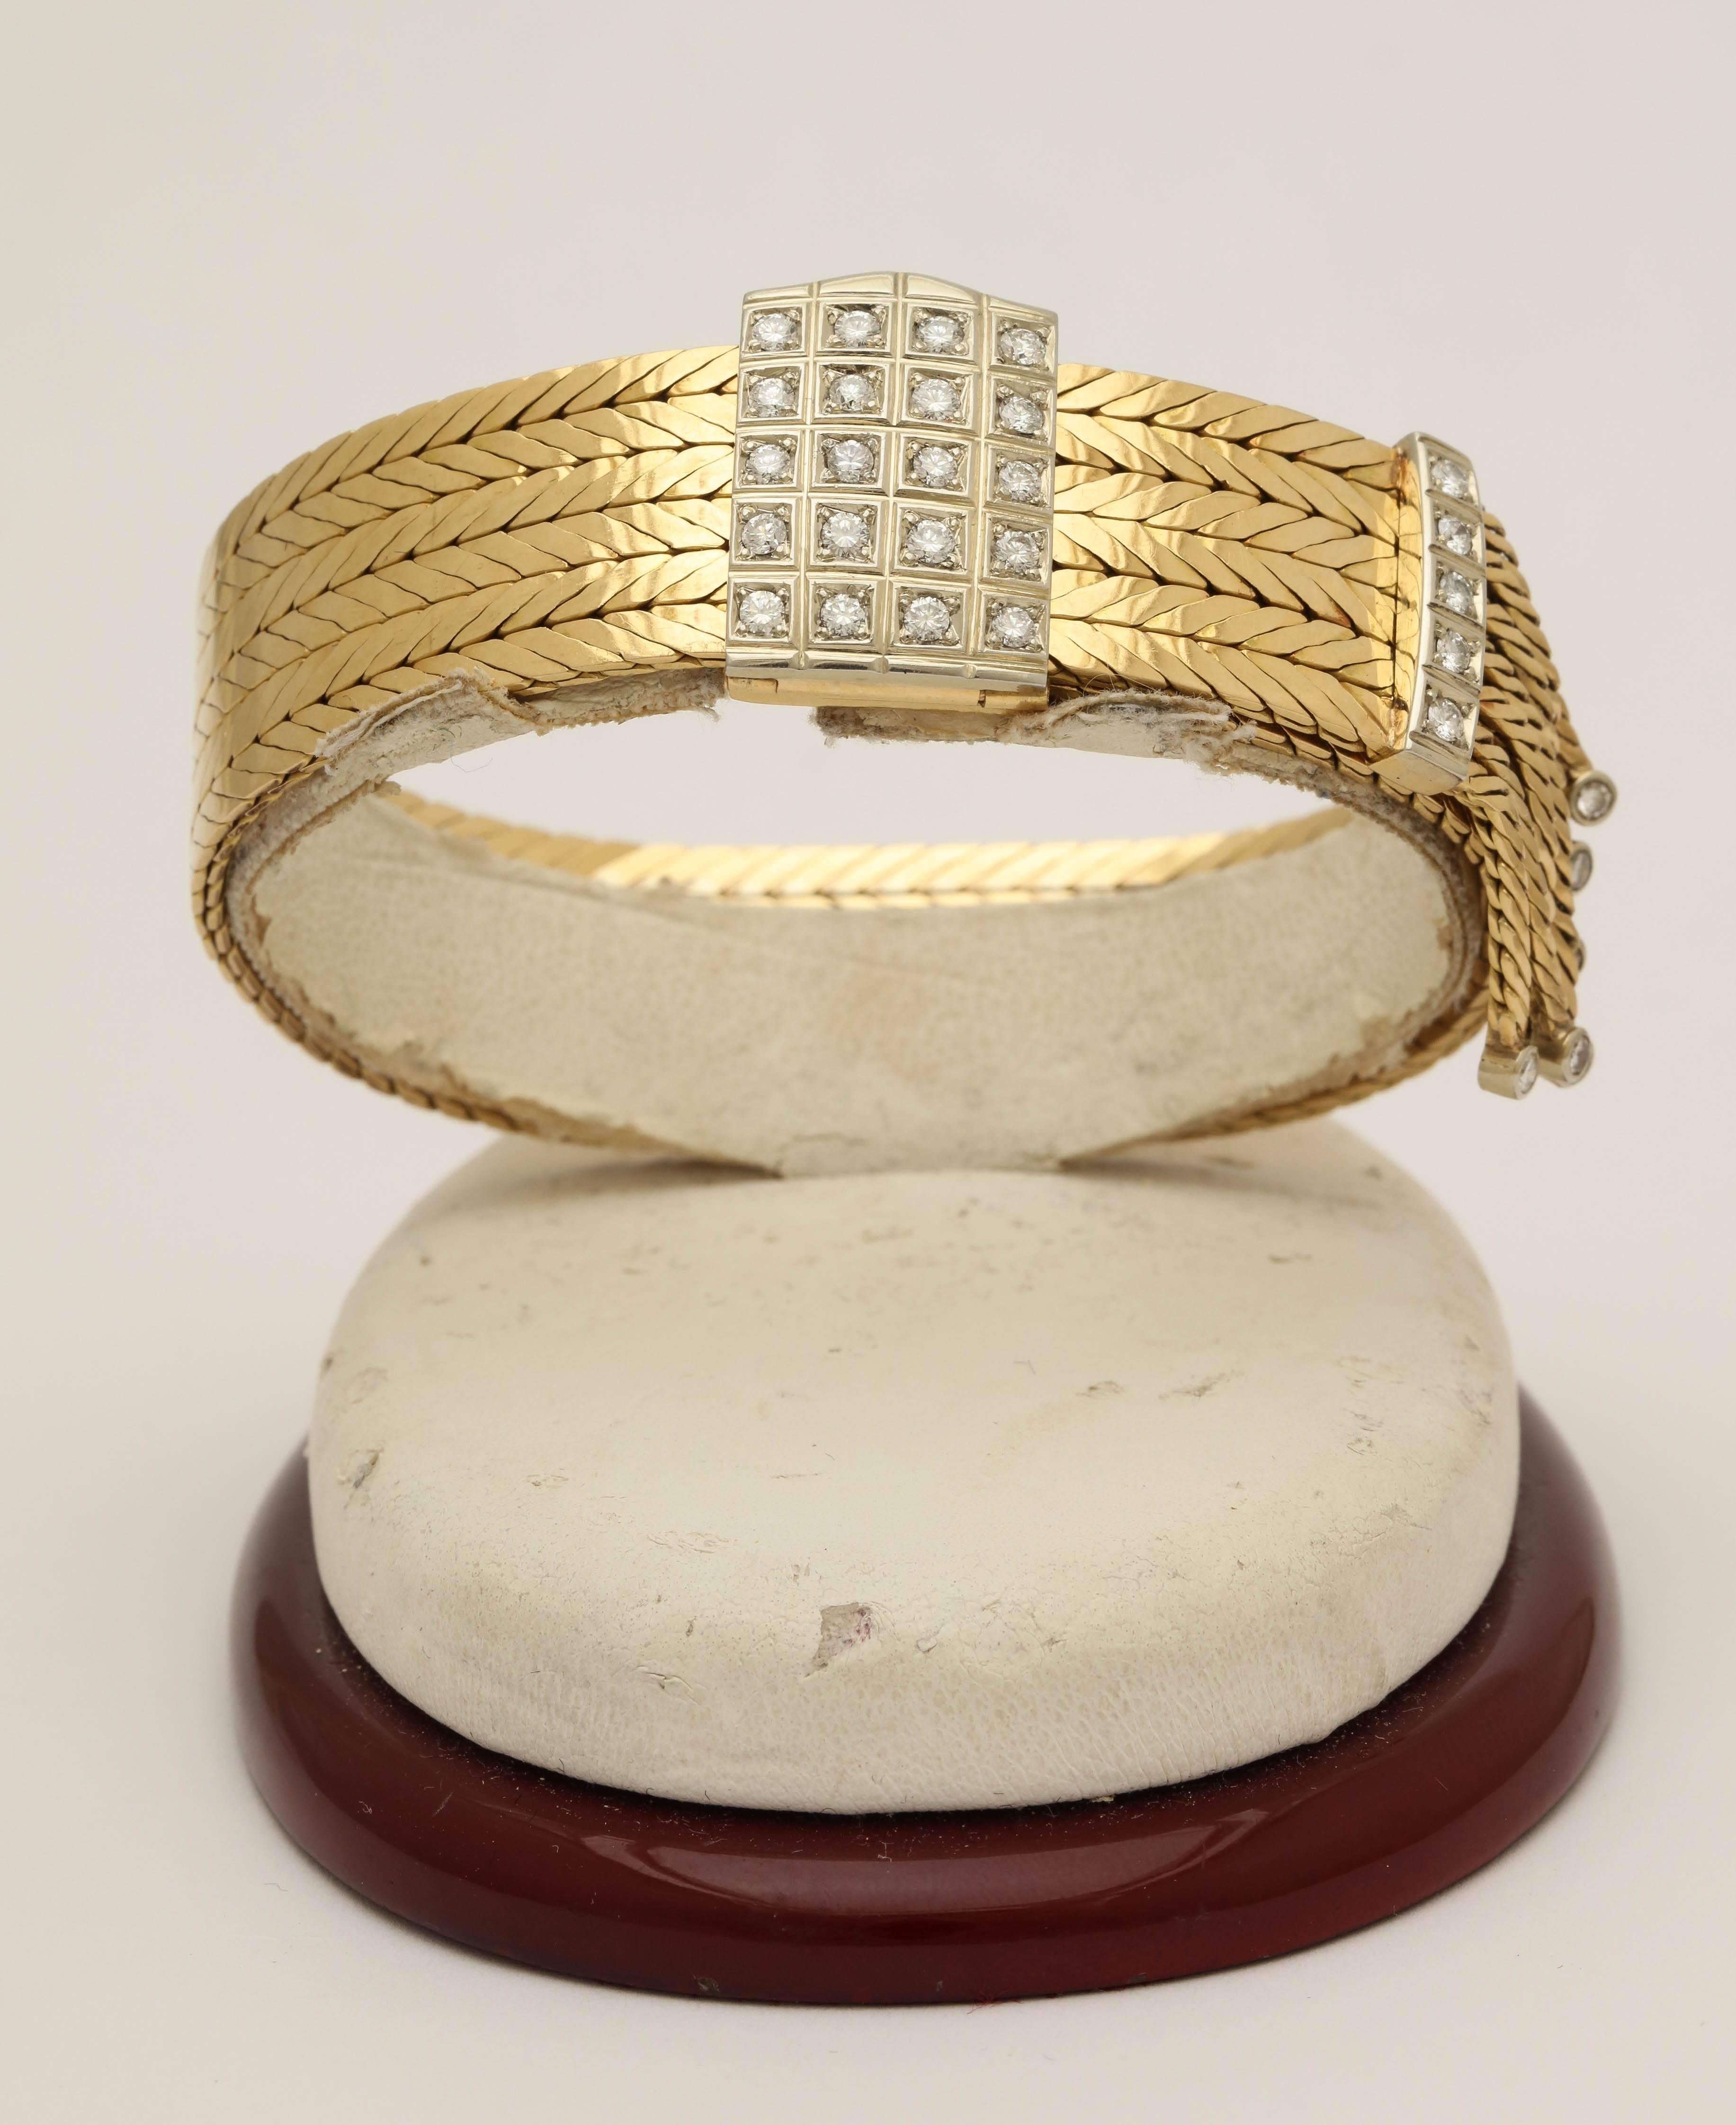 One Elegant Ladies 18kt Yellow Gold Herringbone Textured Belt Strap Bracelet Embellished With Twenty High Quality Full Cut Diamonds On The Clasp Weighing approximately 1 Carat Total weight. Further Designed With 12 Diamonds On The Fringe And Tassel